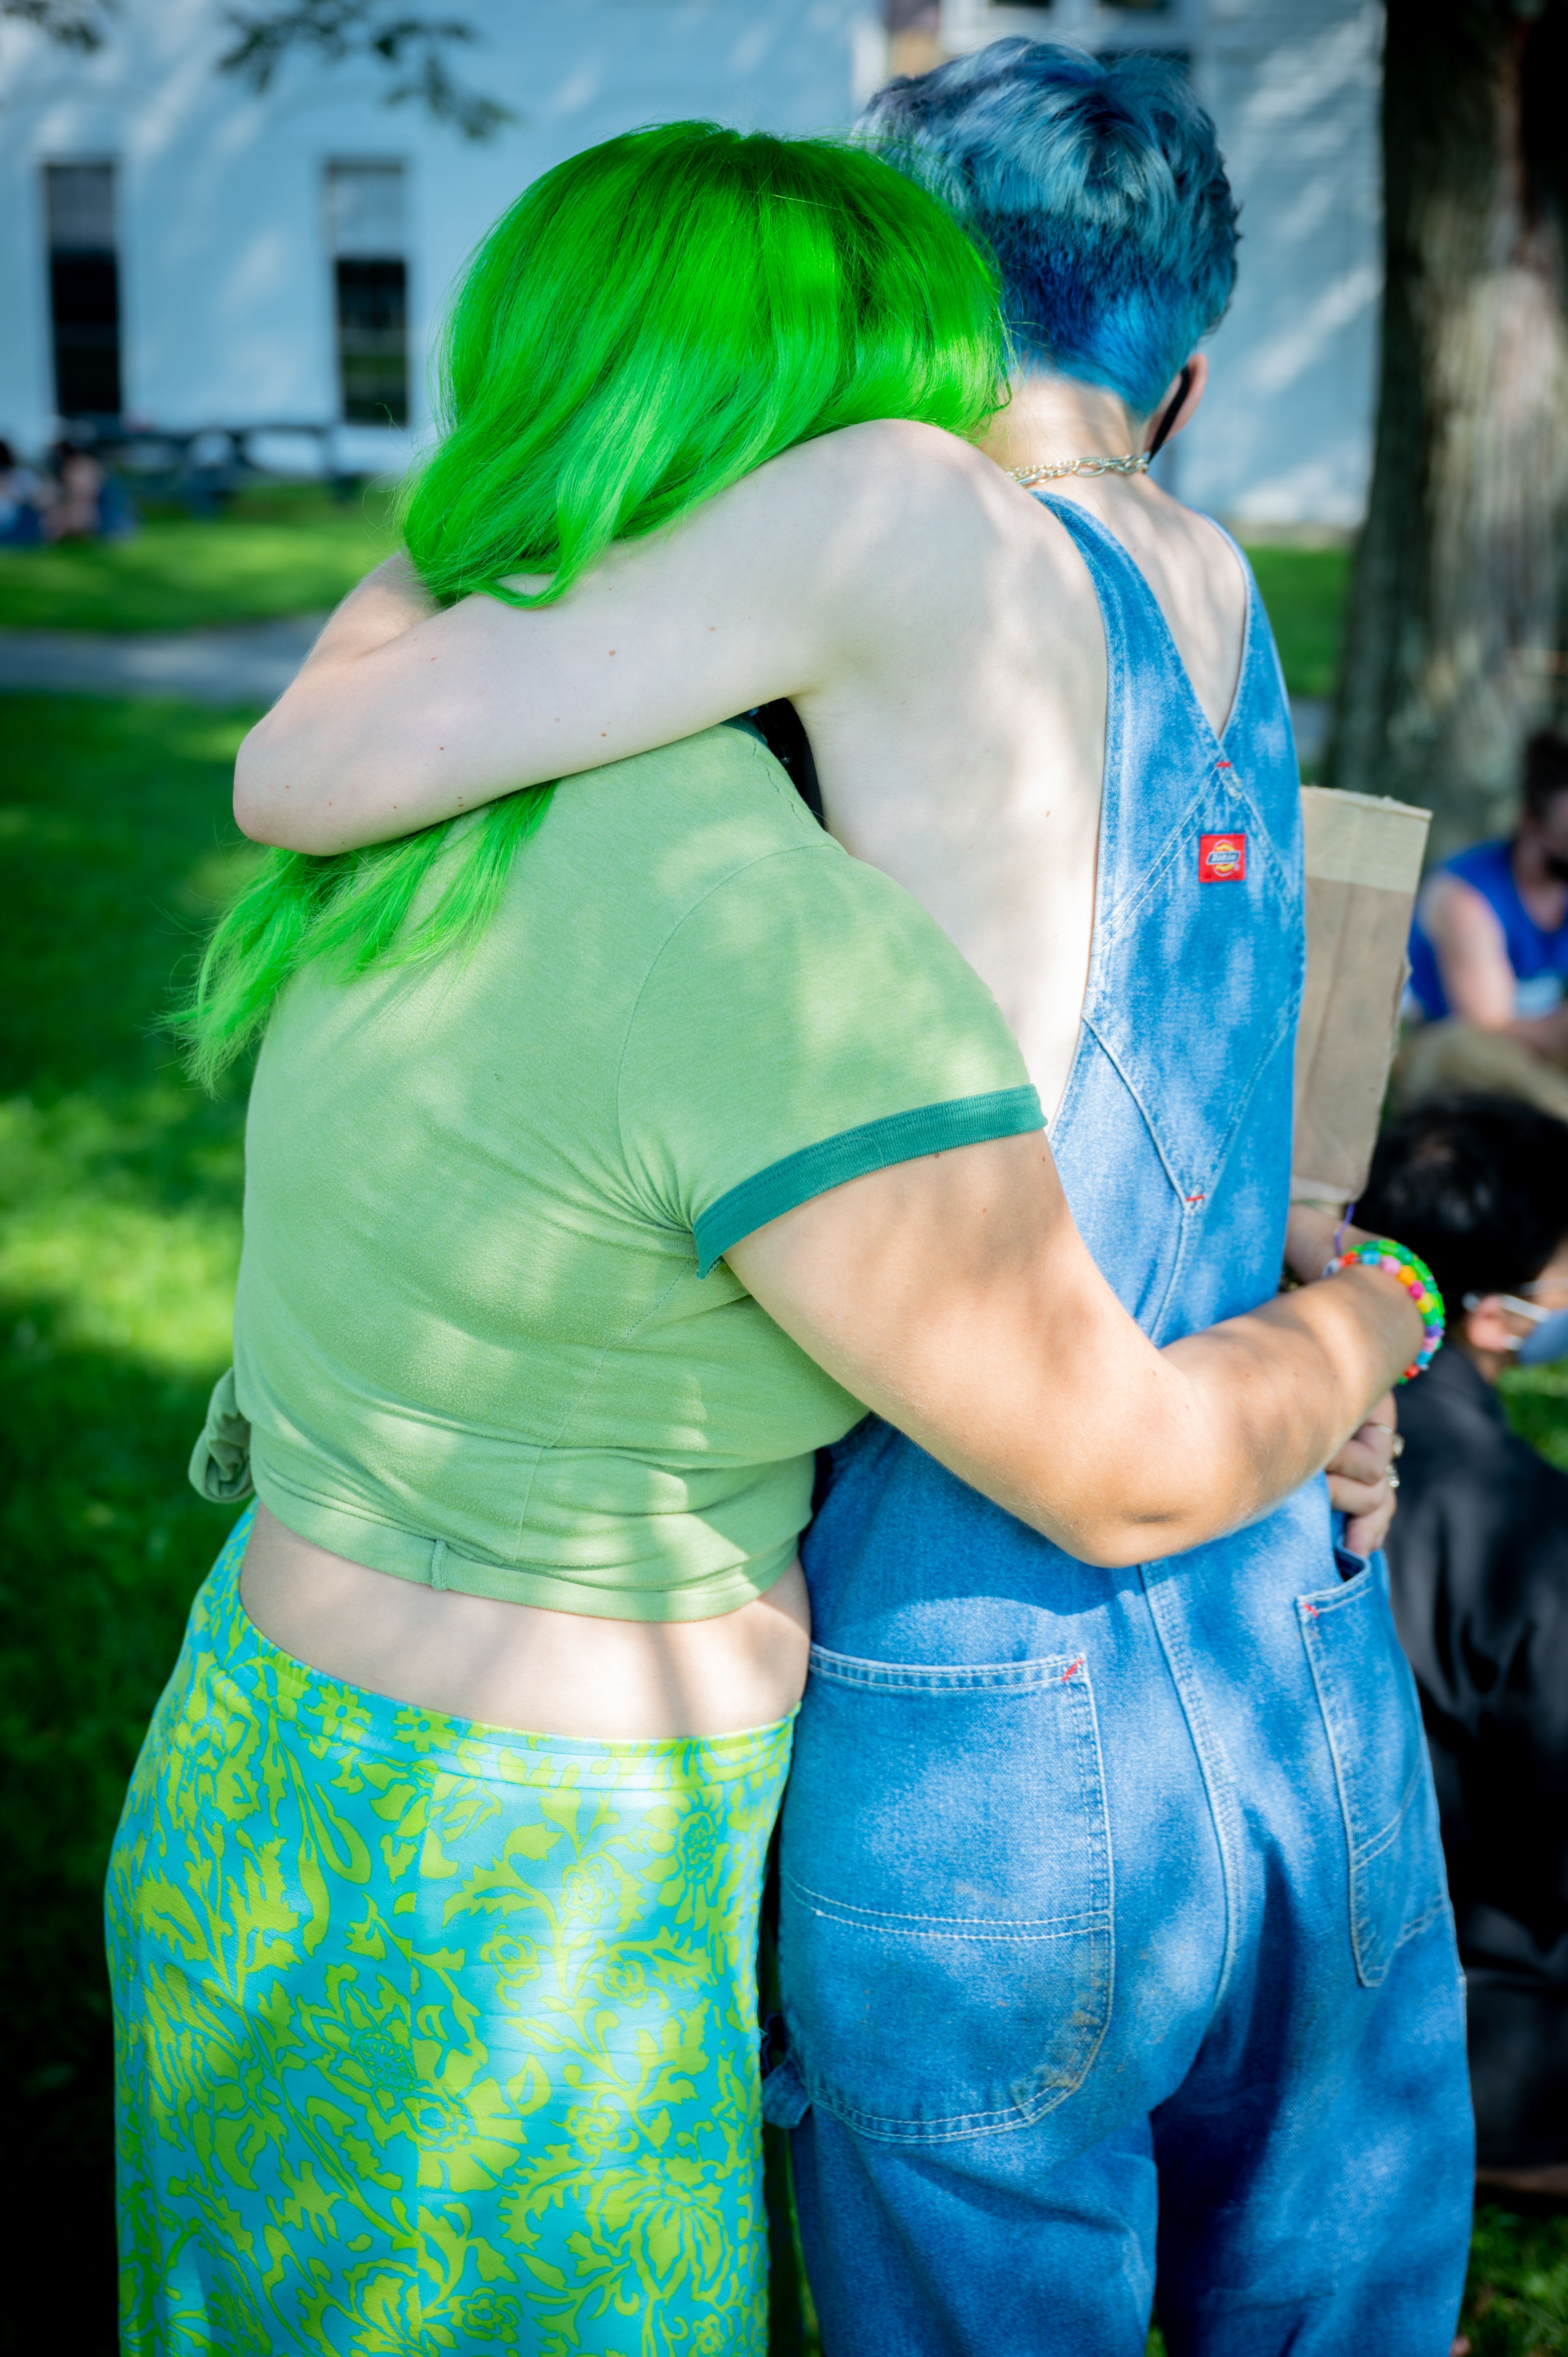 Two college student friends, one in green with green hair, the other in blue with blue hair hug with backs to camera